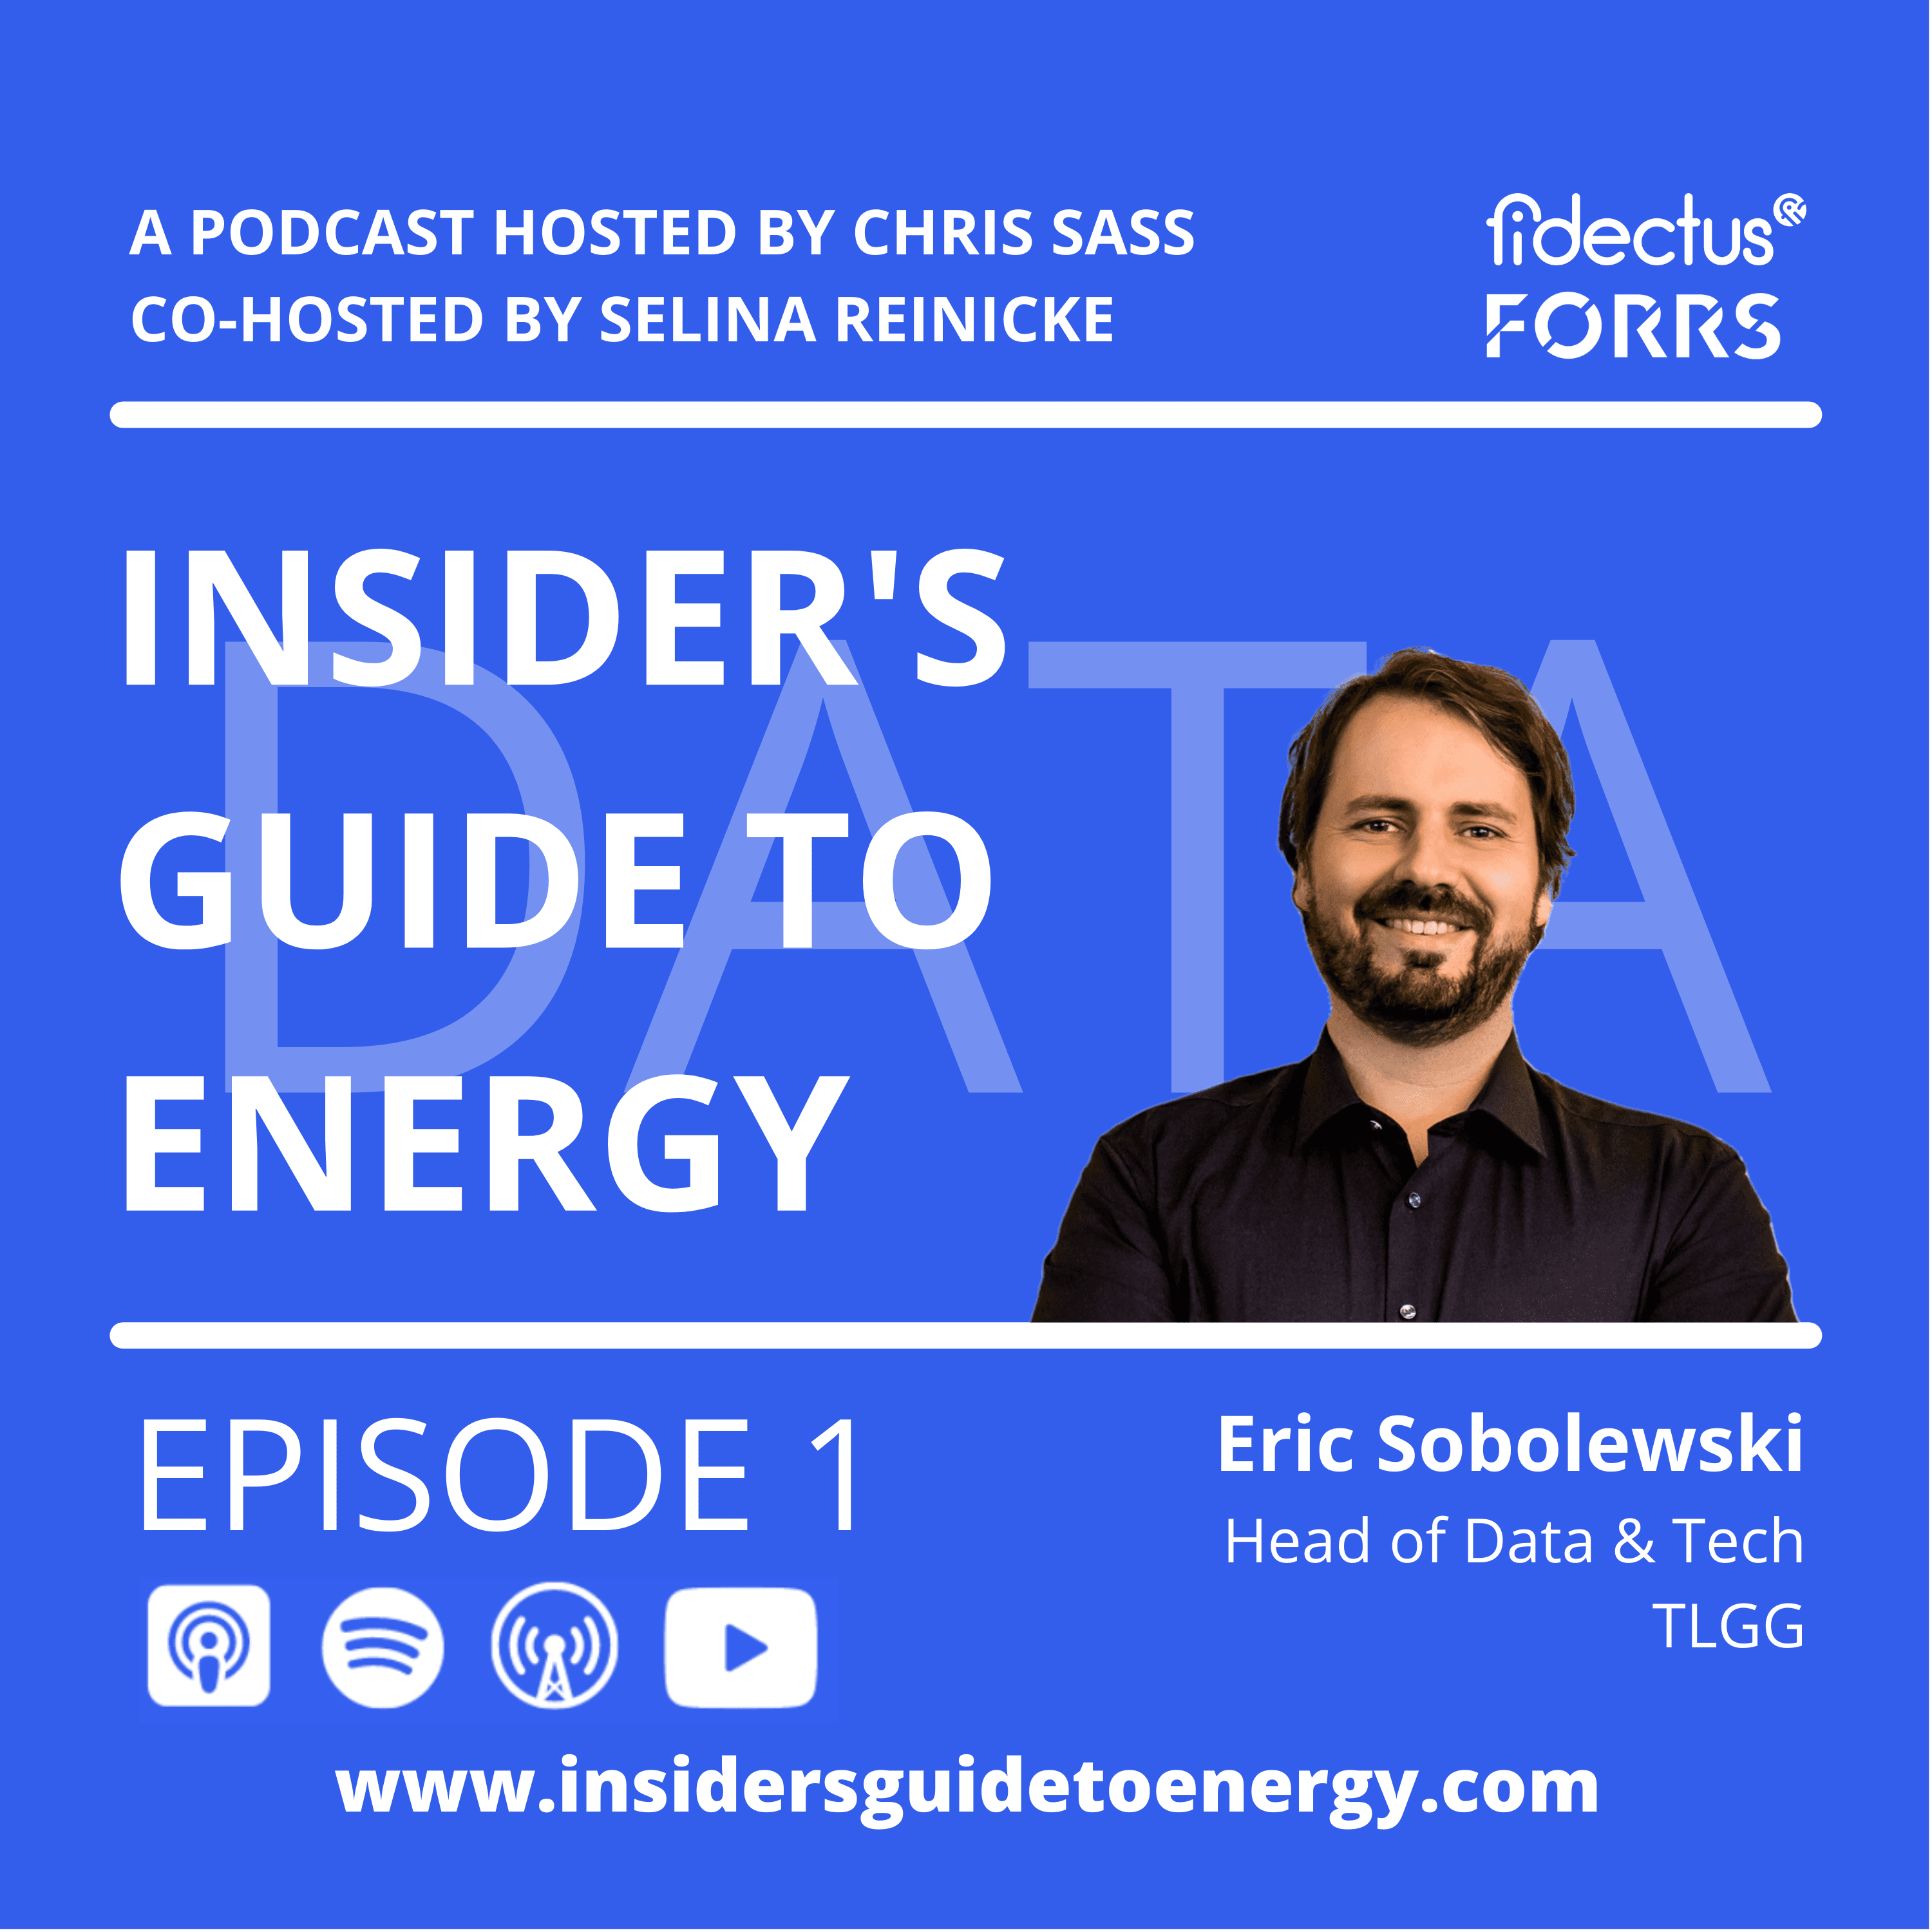 Insiders Guide To Energy - Data Science - Eric Sobolewski(1).png